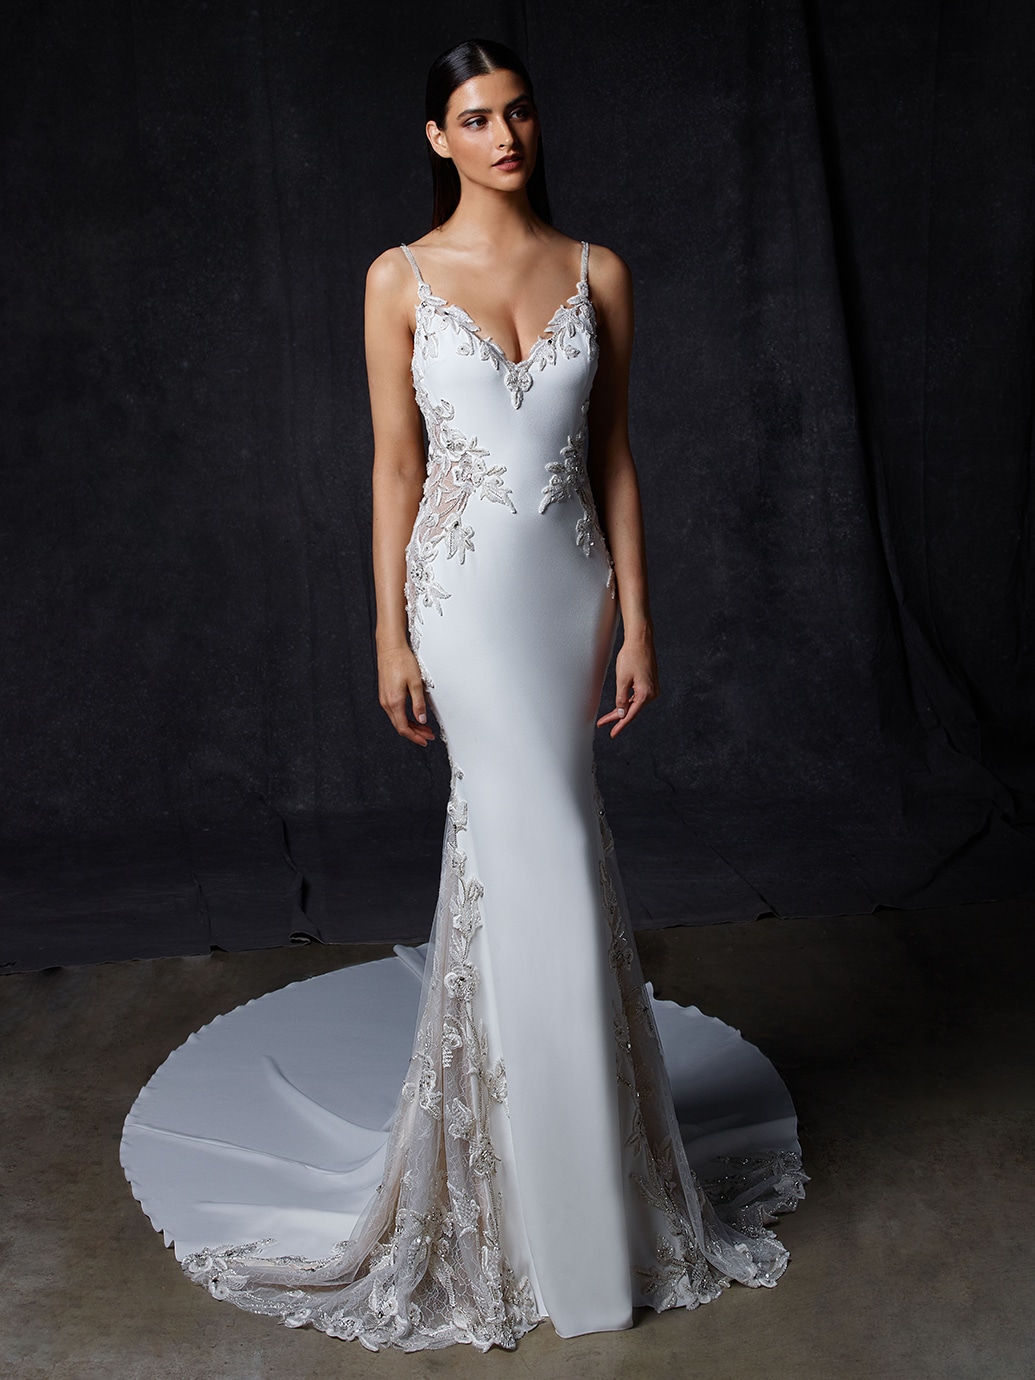 Enzoani Bridal Wedding Gown and Wedding Dress Collection | Bridal ...